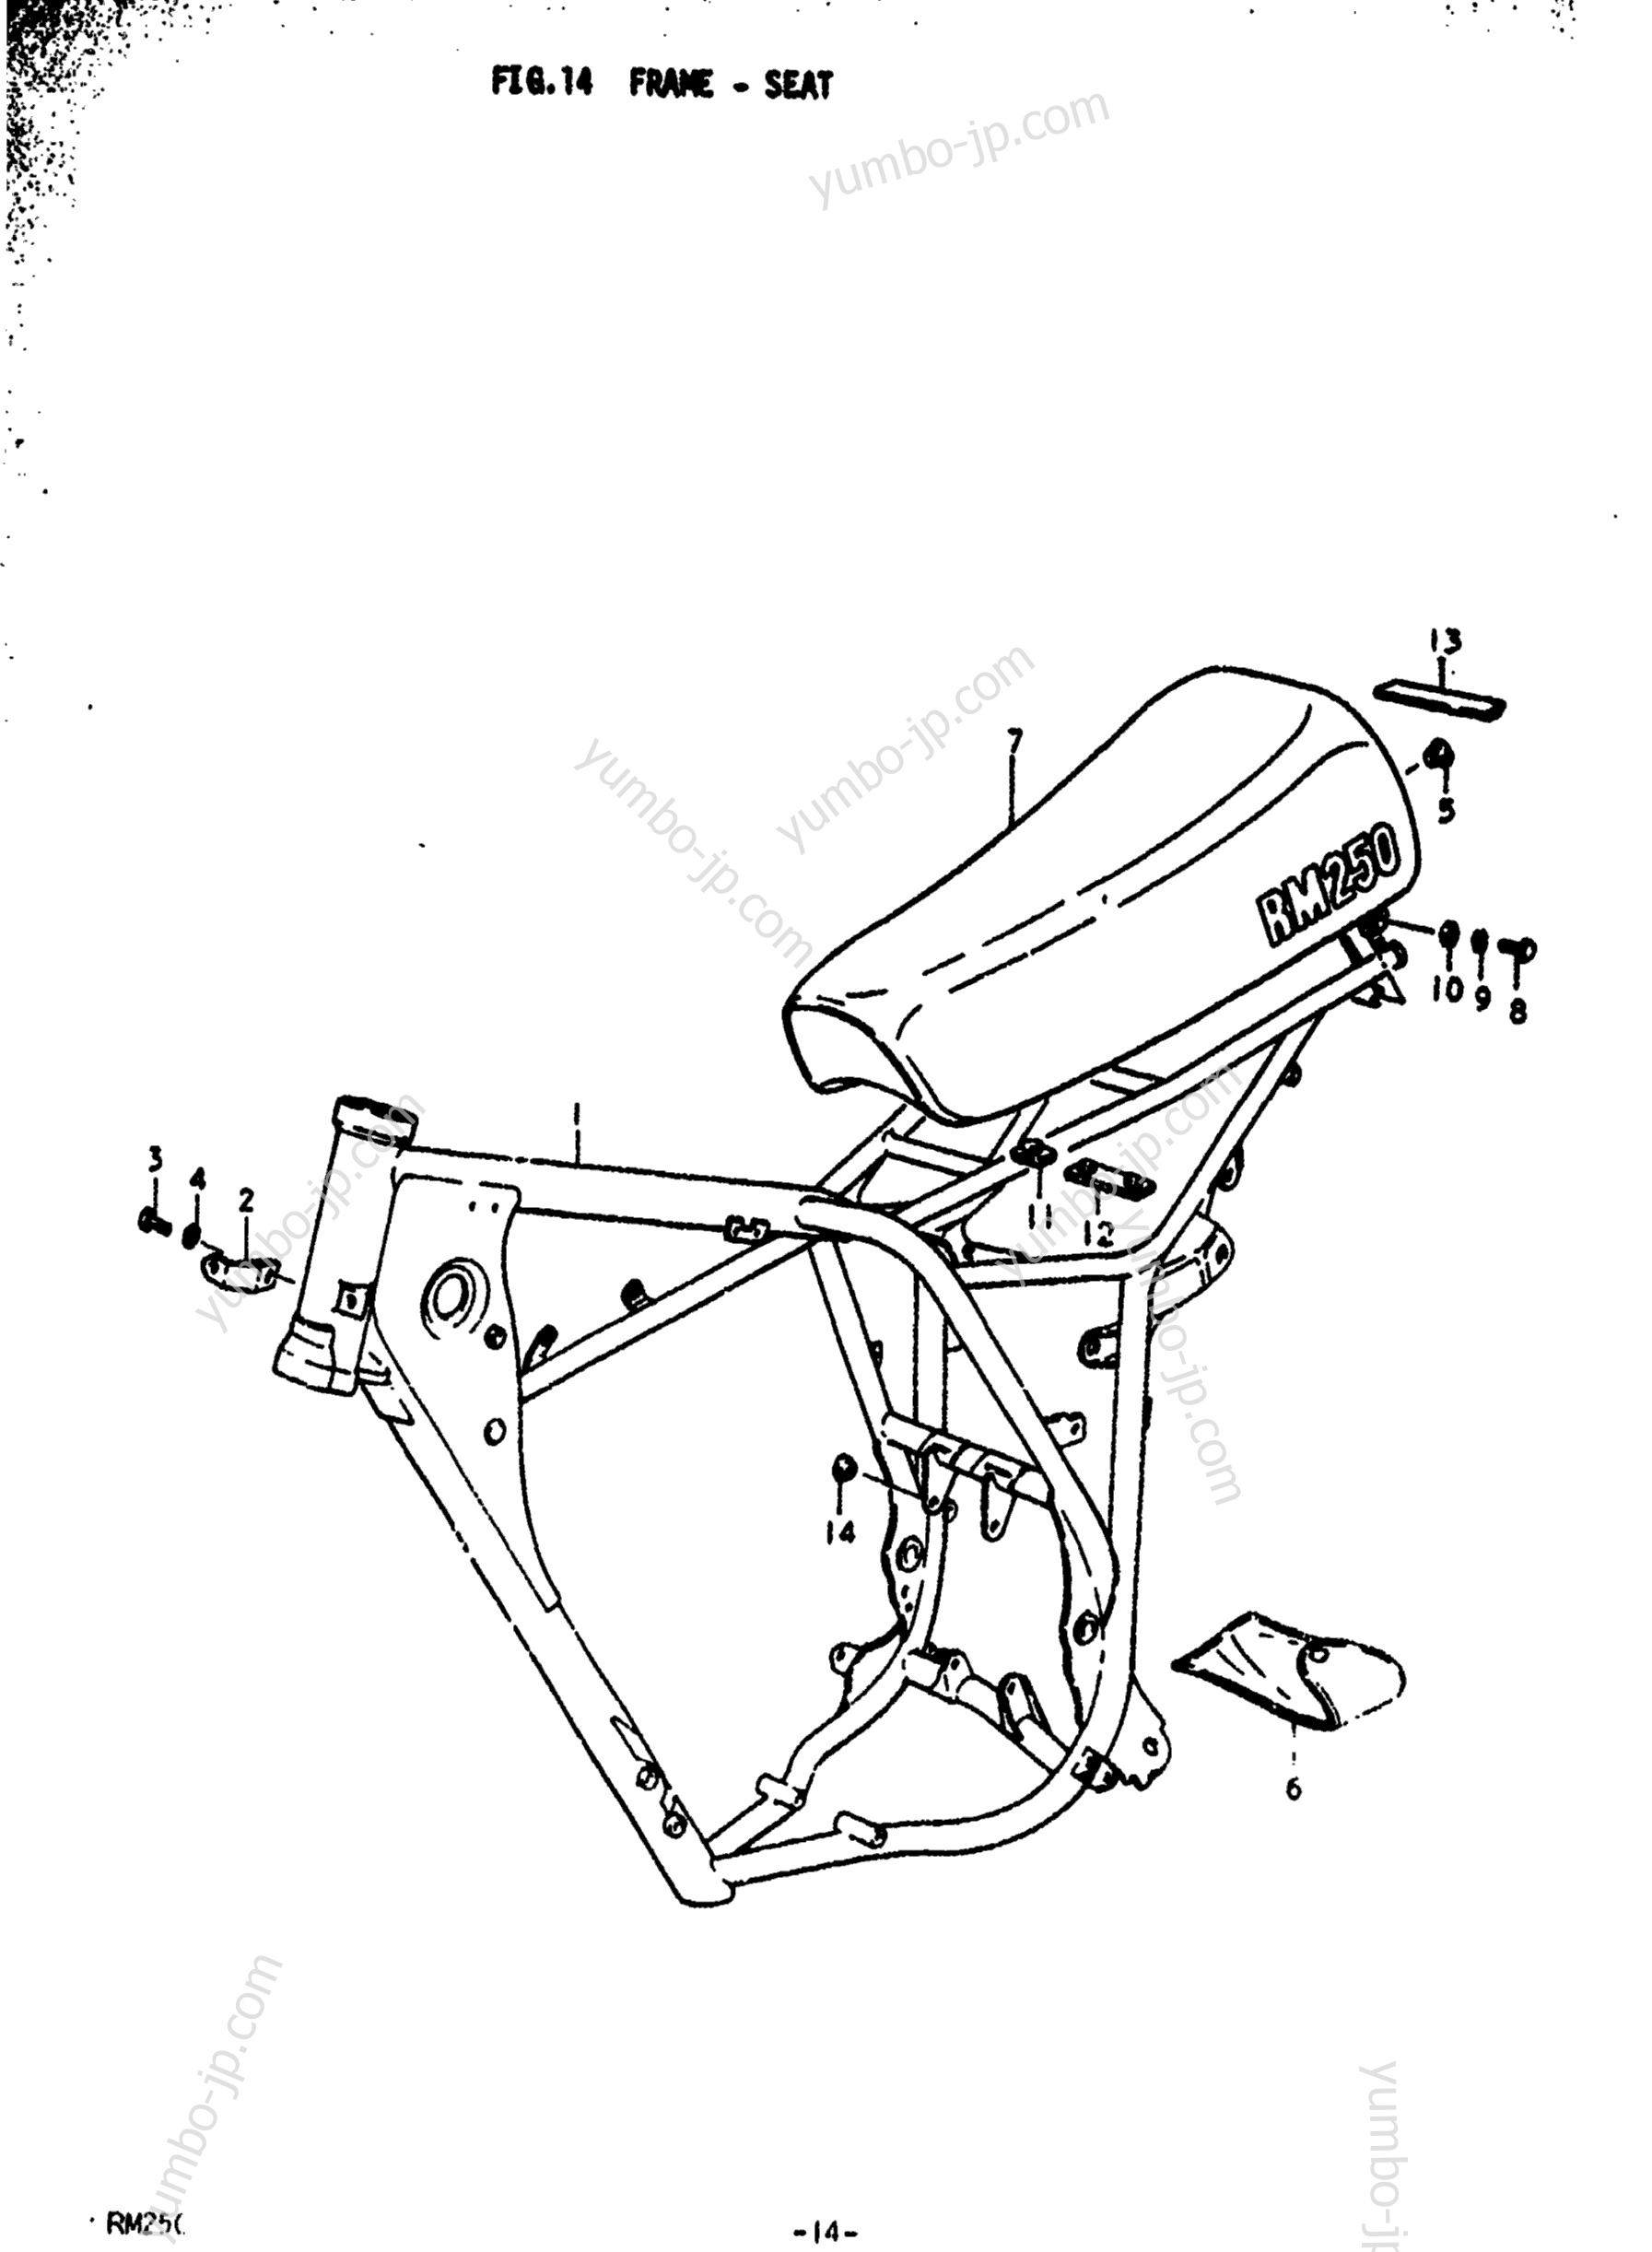 FRAME - SEAT for motorcycles SUZUKI RM250 1978 year